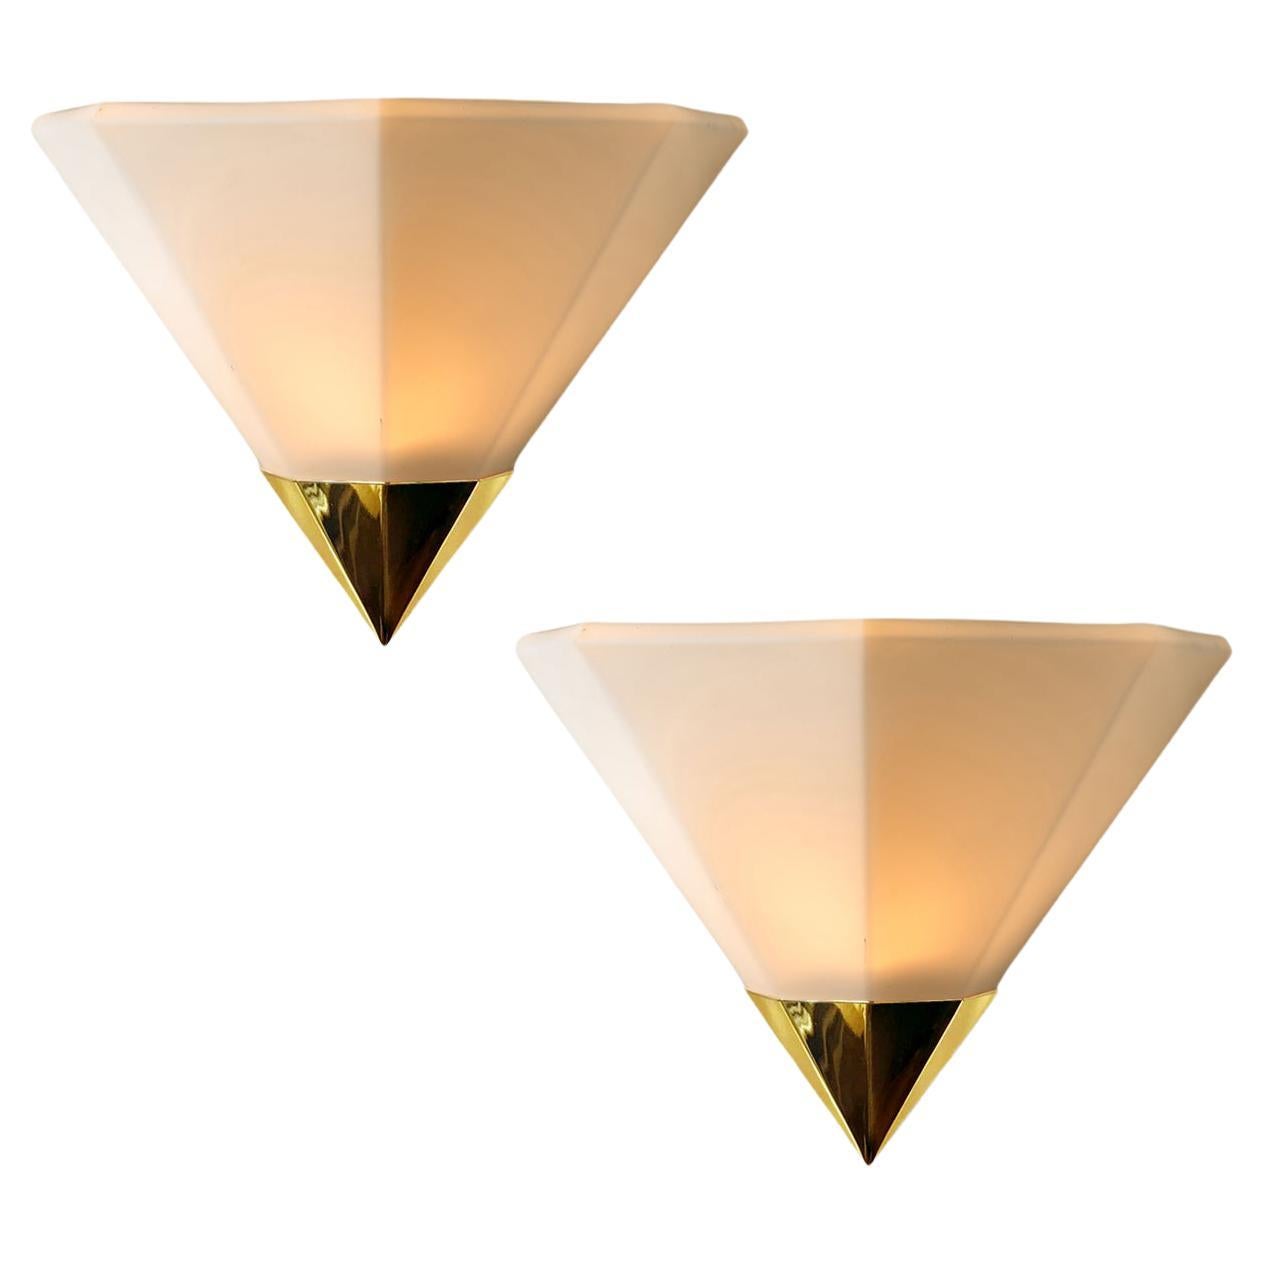 1 of the 8 Mid-Century Pyramid wall lamps by Glashütte Limburg made in Germany in the 1970s. They have a beautiful cone shape and are made of solid brass and opaline glass. The inside is made of metal.

Dimensions Height: 10.24 in. (26 cm) Width: